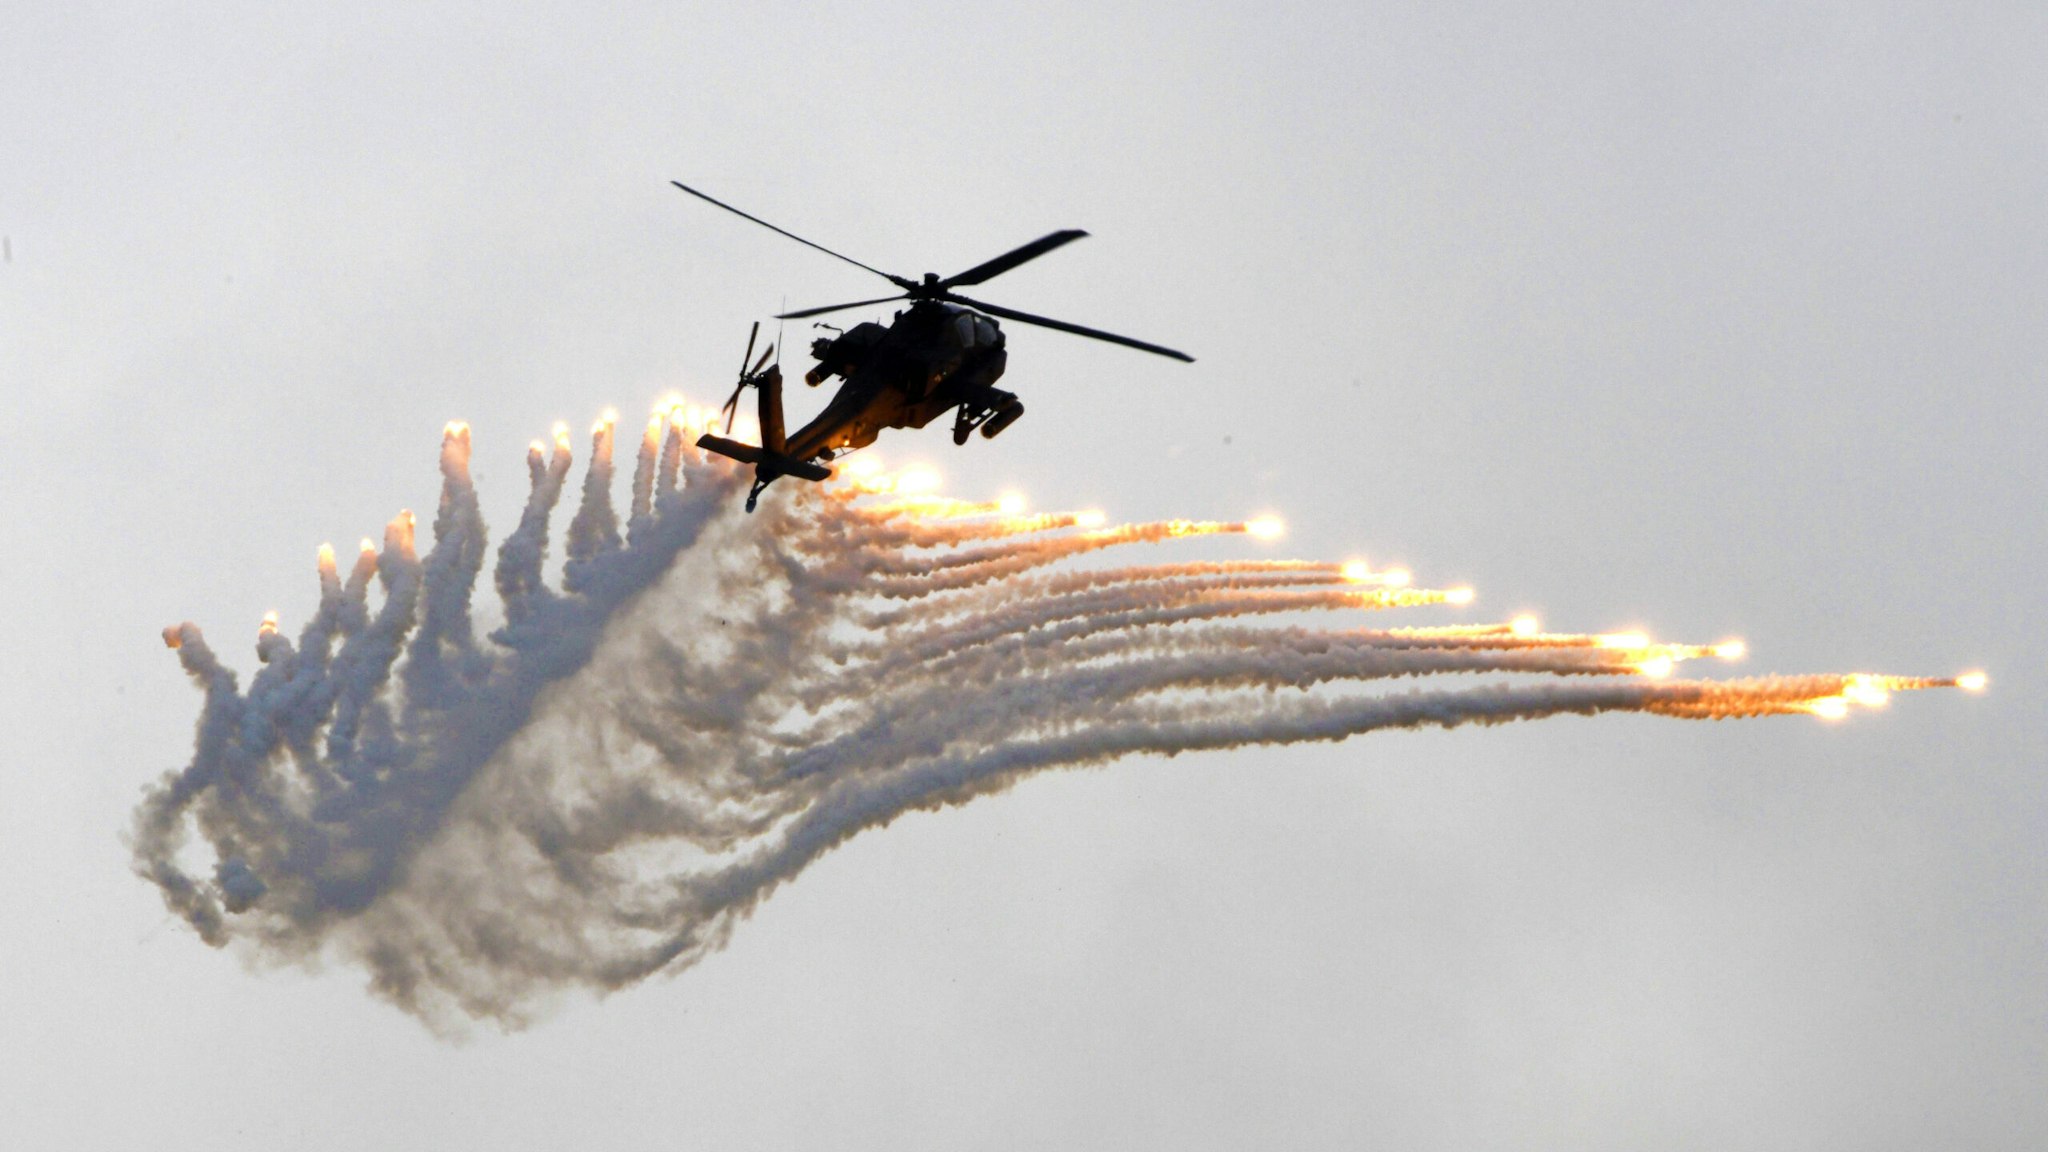 An AH-64 Apache attack helicopter releases flares during the Han Kuang drill at the Ching Chuan Kang (CCK) air force base in Taichung, central Taiwan, on June 7, 2018. - Taiwan on June 7 staged its largest annual drills simulating Chinese attacks as Beijing stepped up military and diplomatic pressure on the island amid growing tensions.